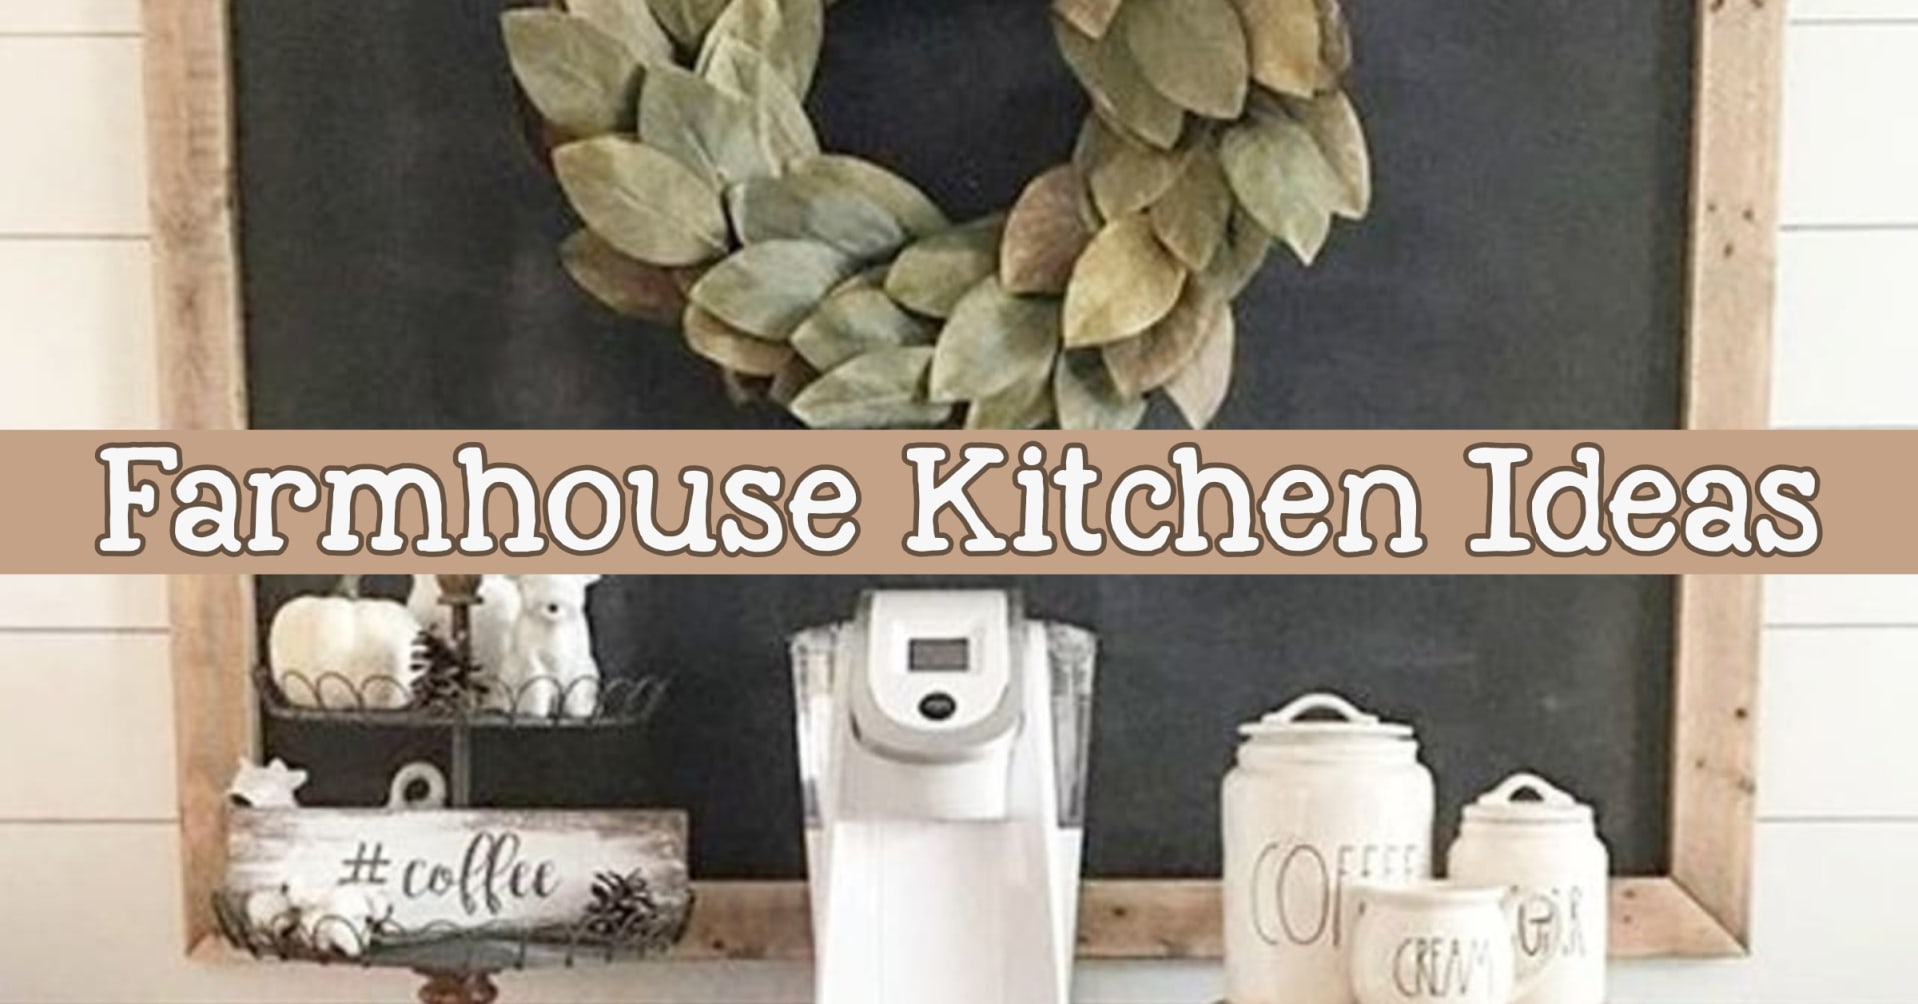 Farmhouse Kitchen Canister Sets And Farmhouse Kitchen Decor Ideas Coffee Bar Ideas Too,Blue Gray Bedroom Curtains